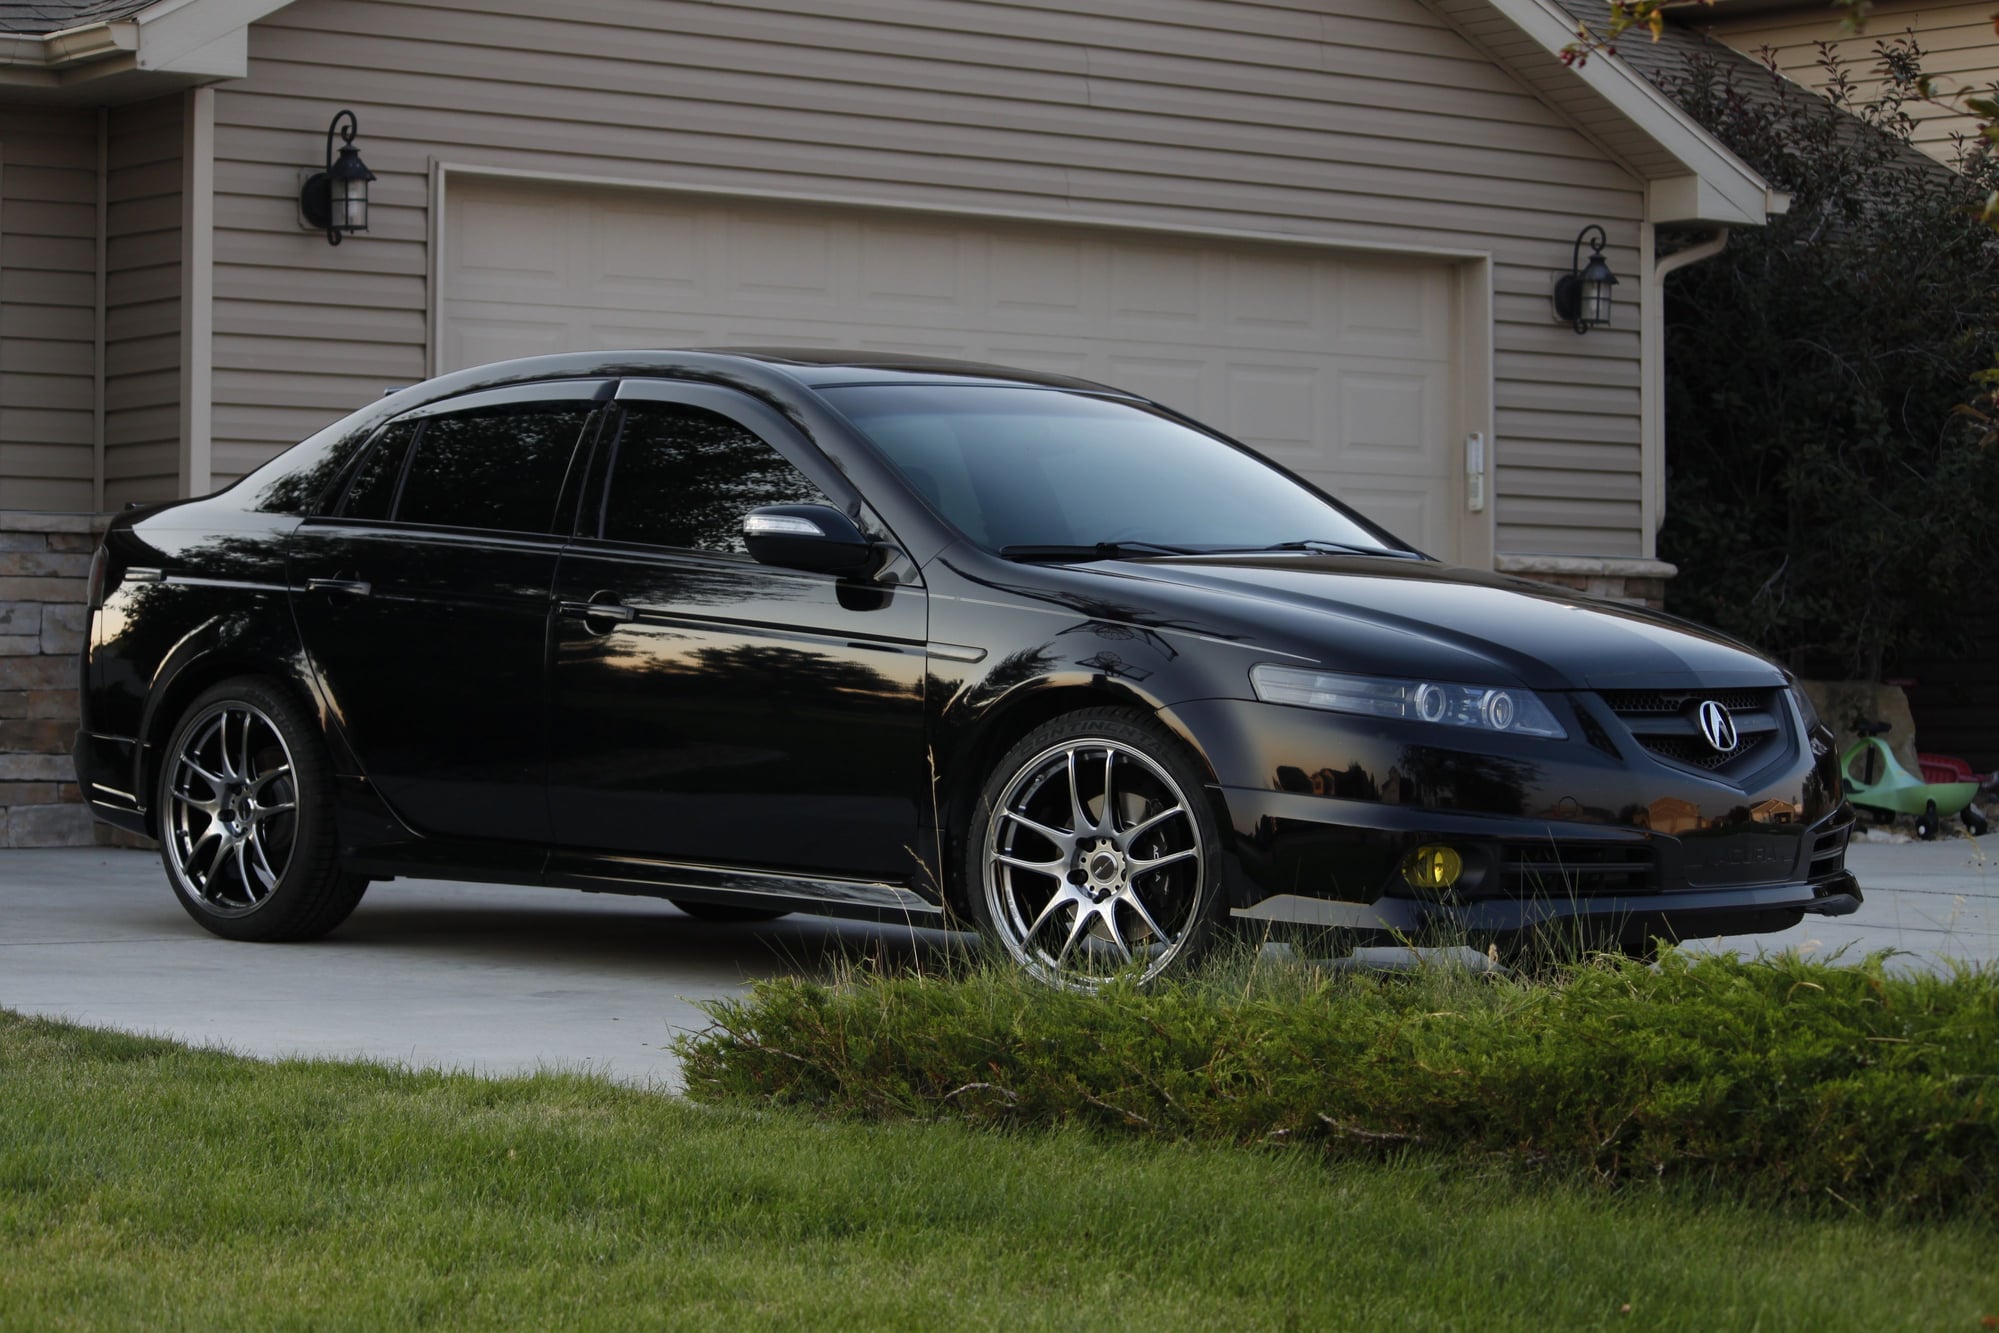 Type S A-Spec lip kit... my thoughts - AcuraZine - Acura Ent